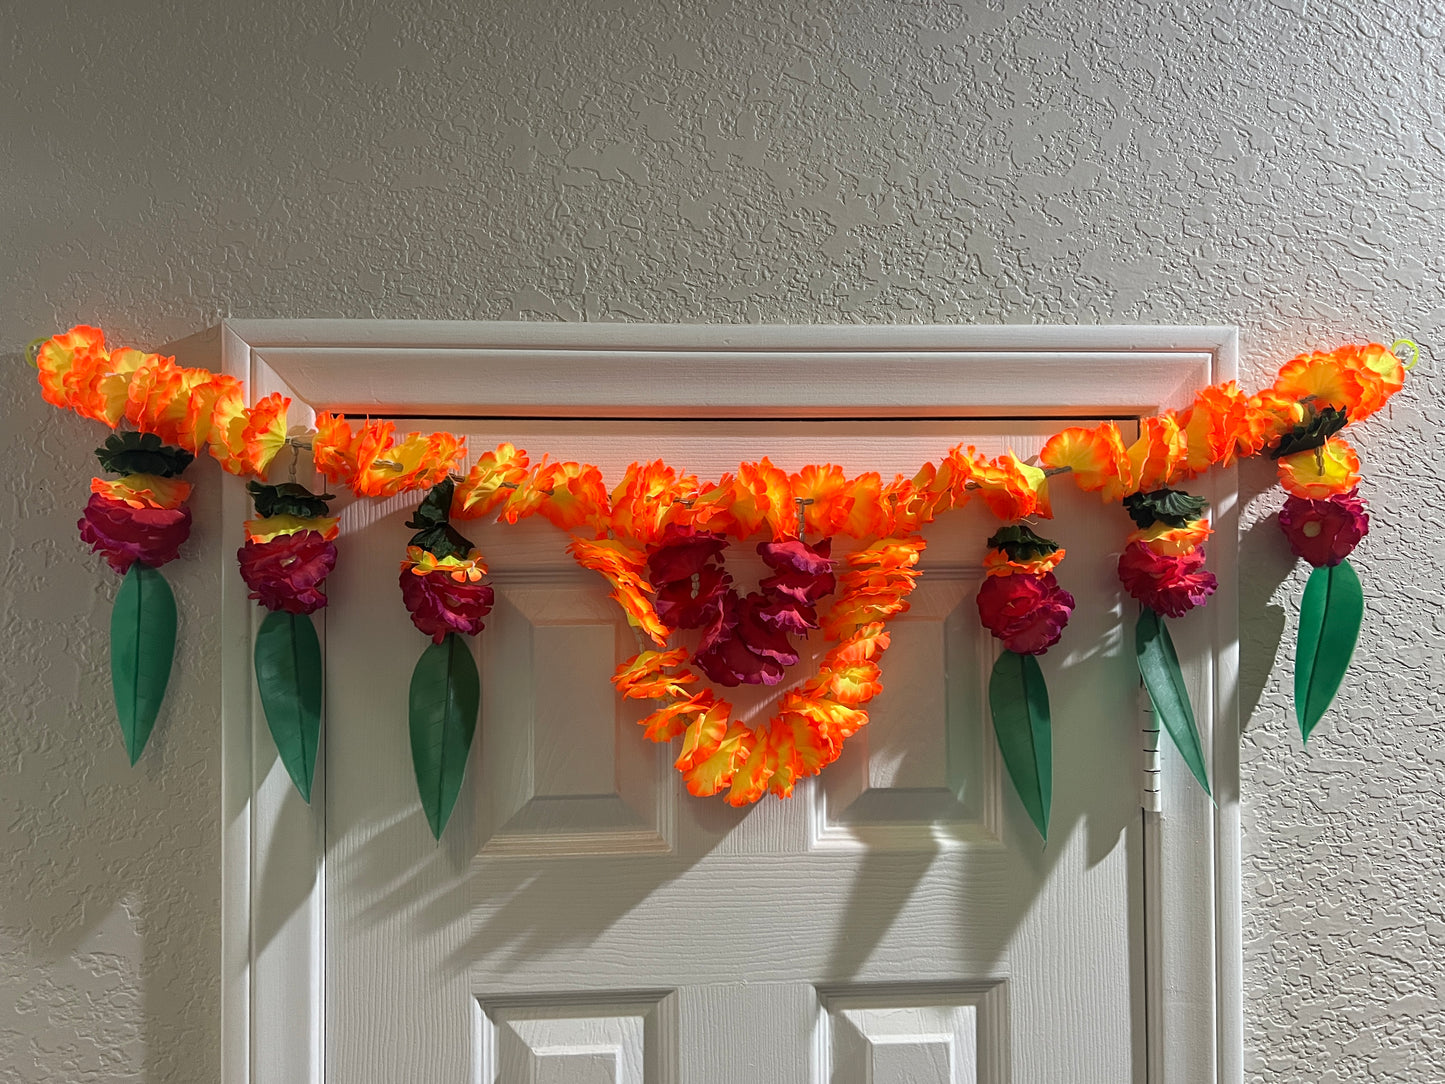 1 Pc Artificial Flower Bandarwal with Leaves for Door Decoration Multicolor String Toran for Indian Diwali Decorations Items Fancy Garland Door Latkan Hangings Valance Floral Festival Decoration Toran Indian Wedding Decoration